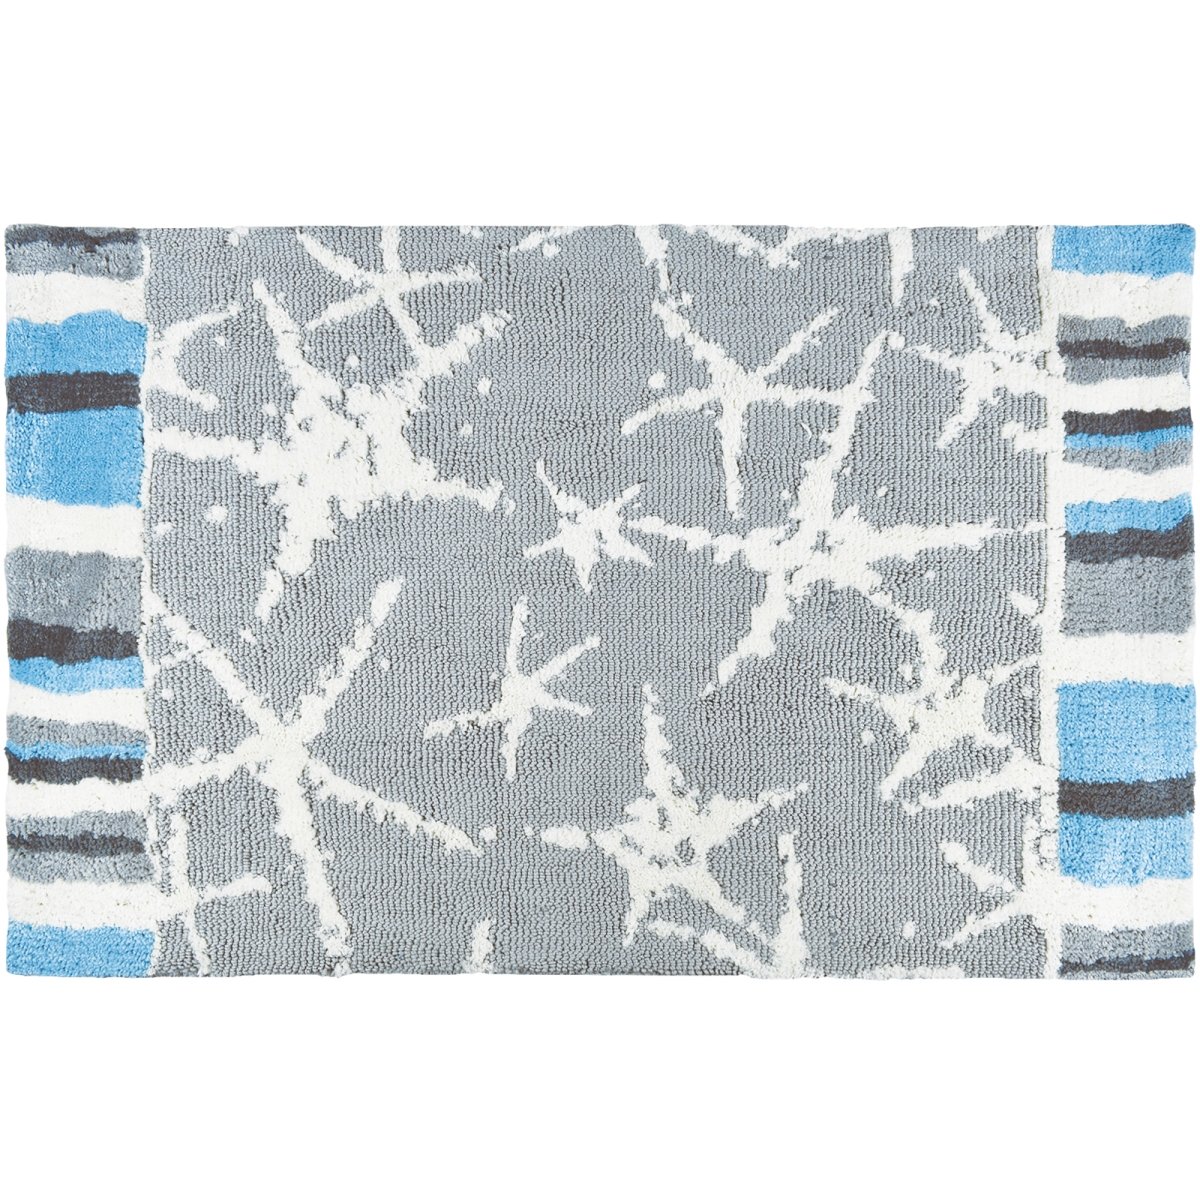 Ss-kr001b 21 X 33 In. Starfish Sea Accent Rug